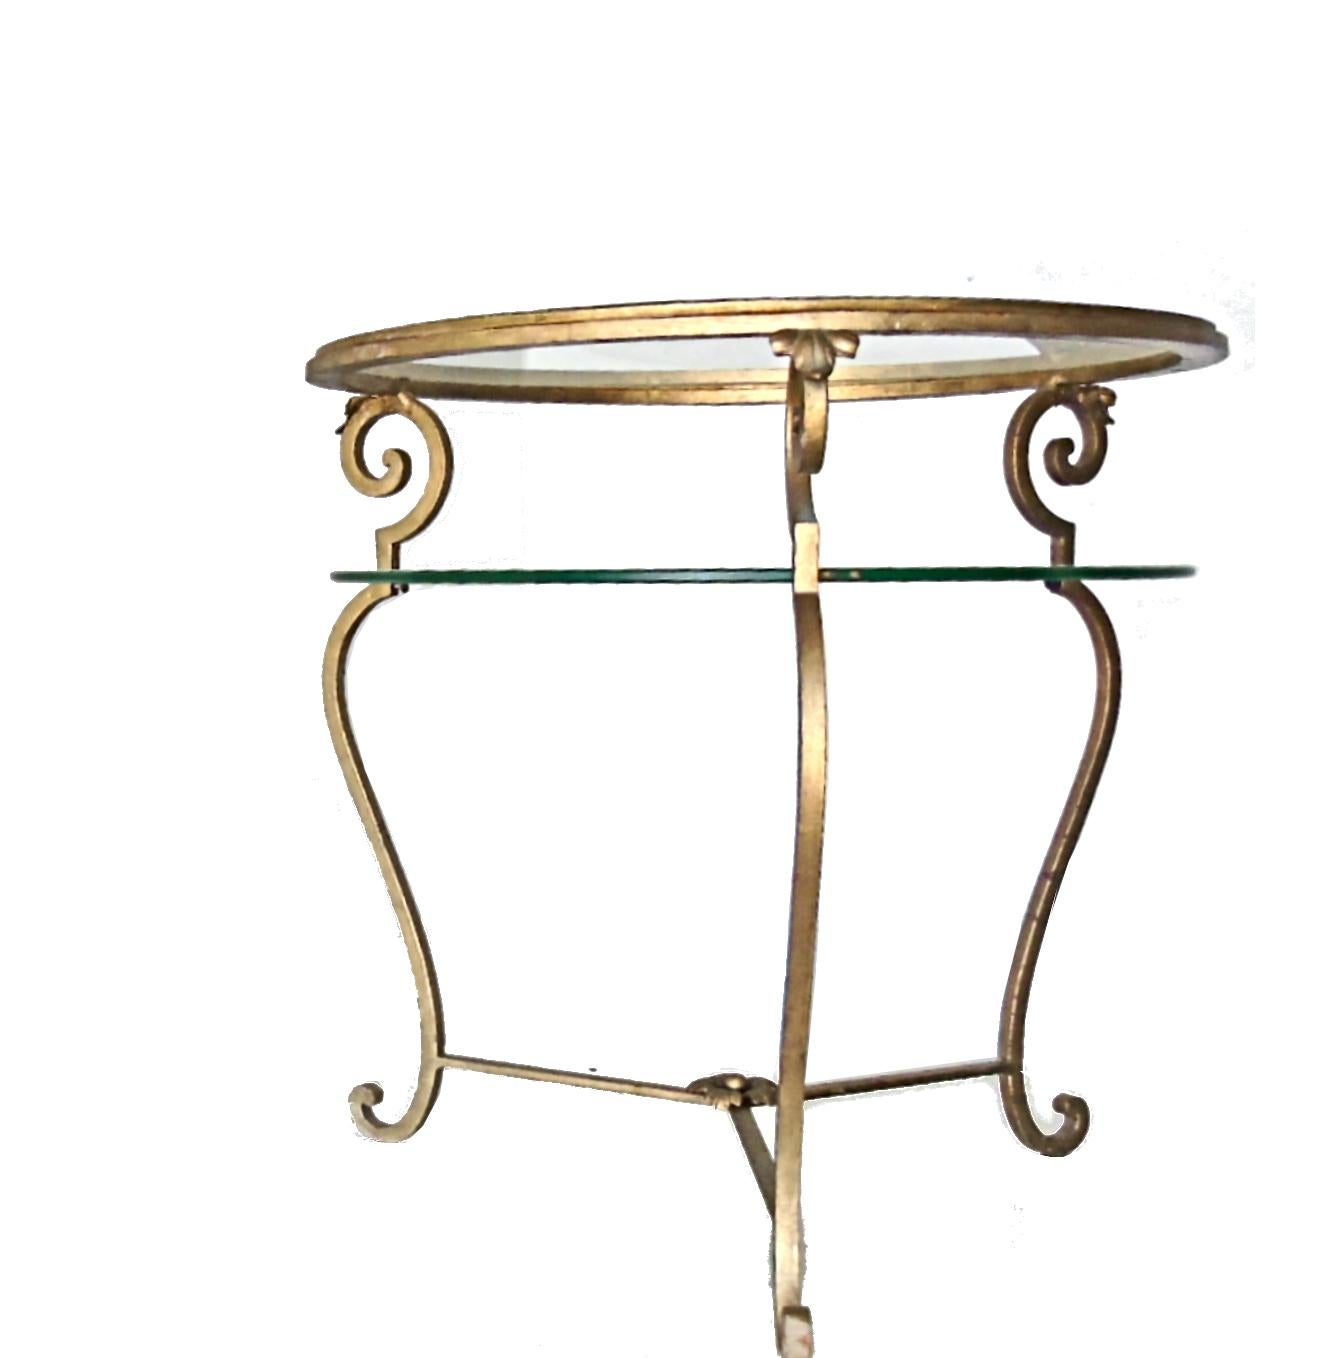 Charming midcentury gilt metal two-tier round side table.

This neoclassical side table is in a beautifully patinated condition.

It has a casted flower figure on the base and elegant curled legs.

1950s, Italy.

Measures: Height is 45cm /17